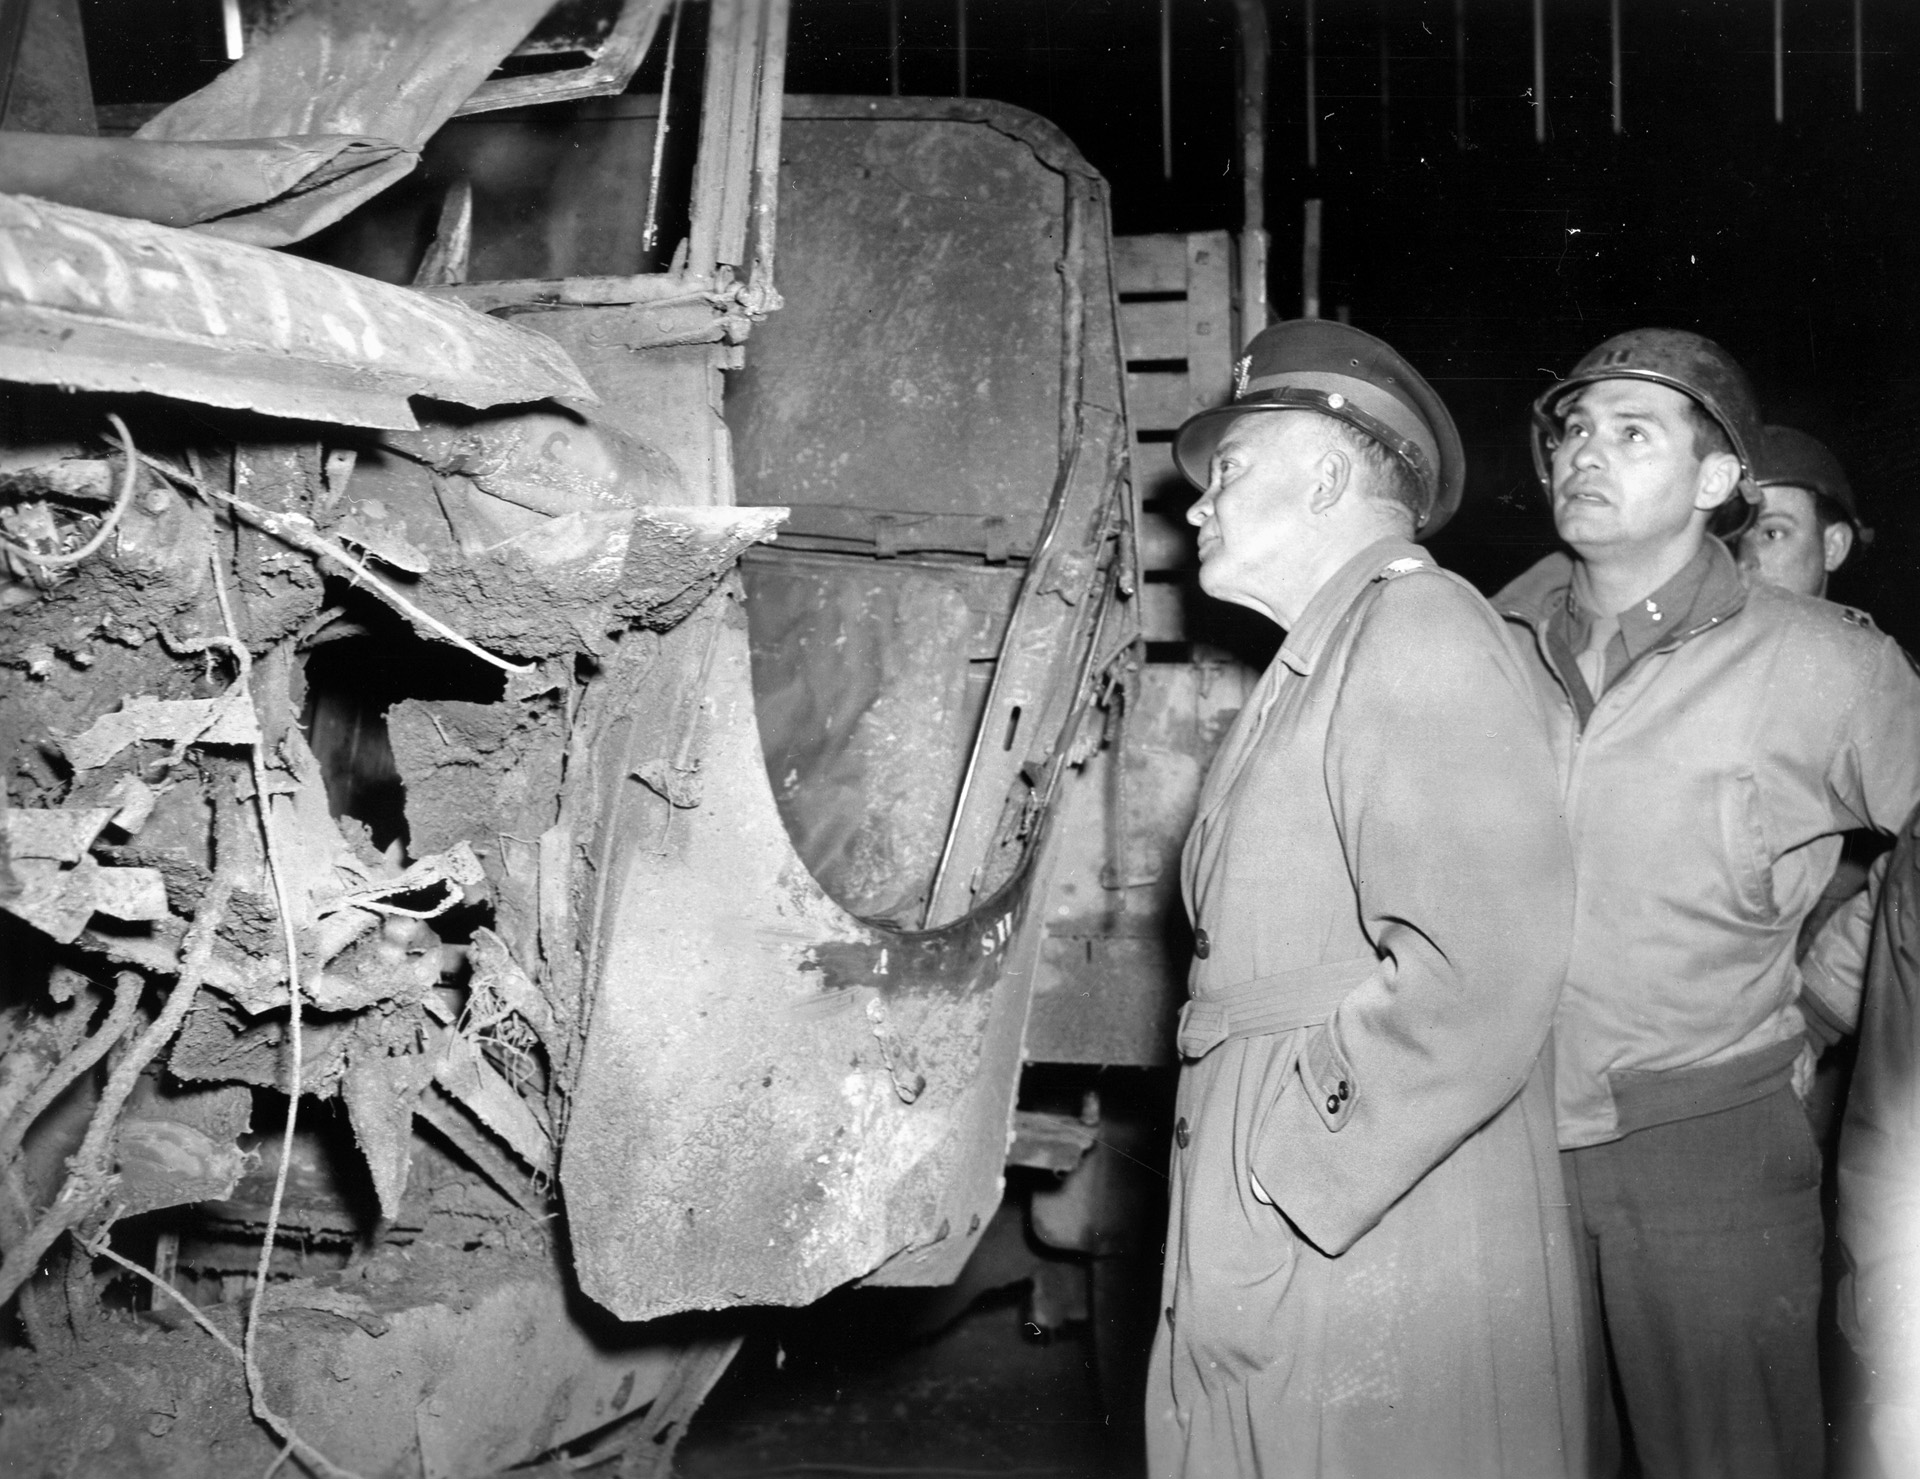 Eisenhower examines a damaged 2-and-a-1/2-ton truck that had run over a land mine.